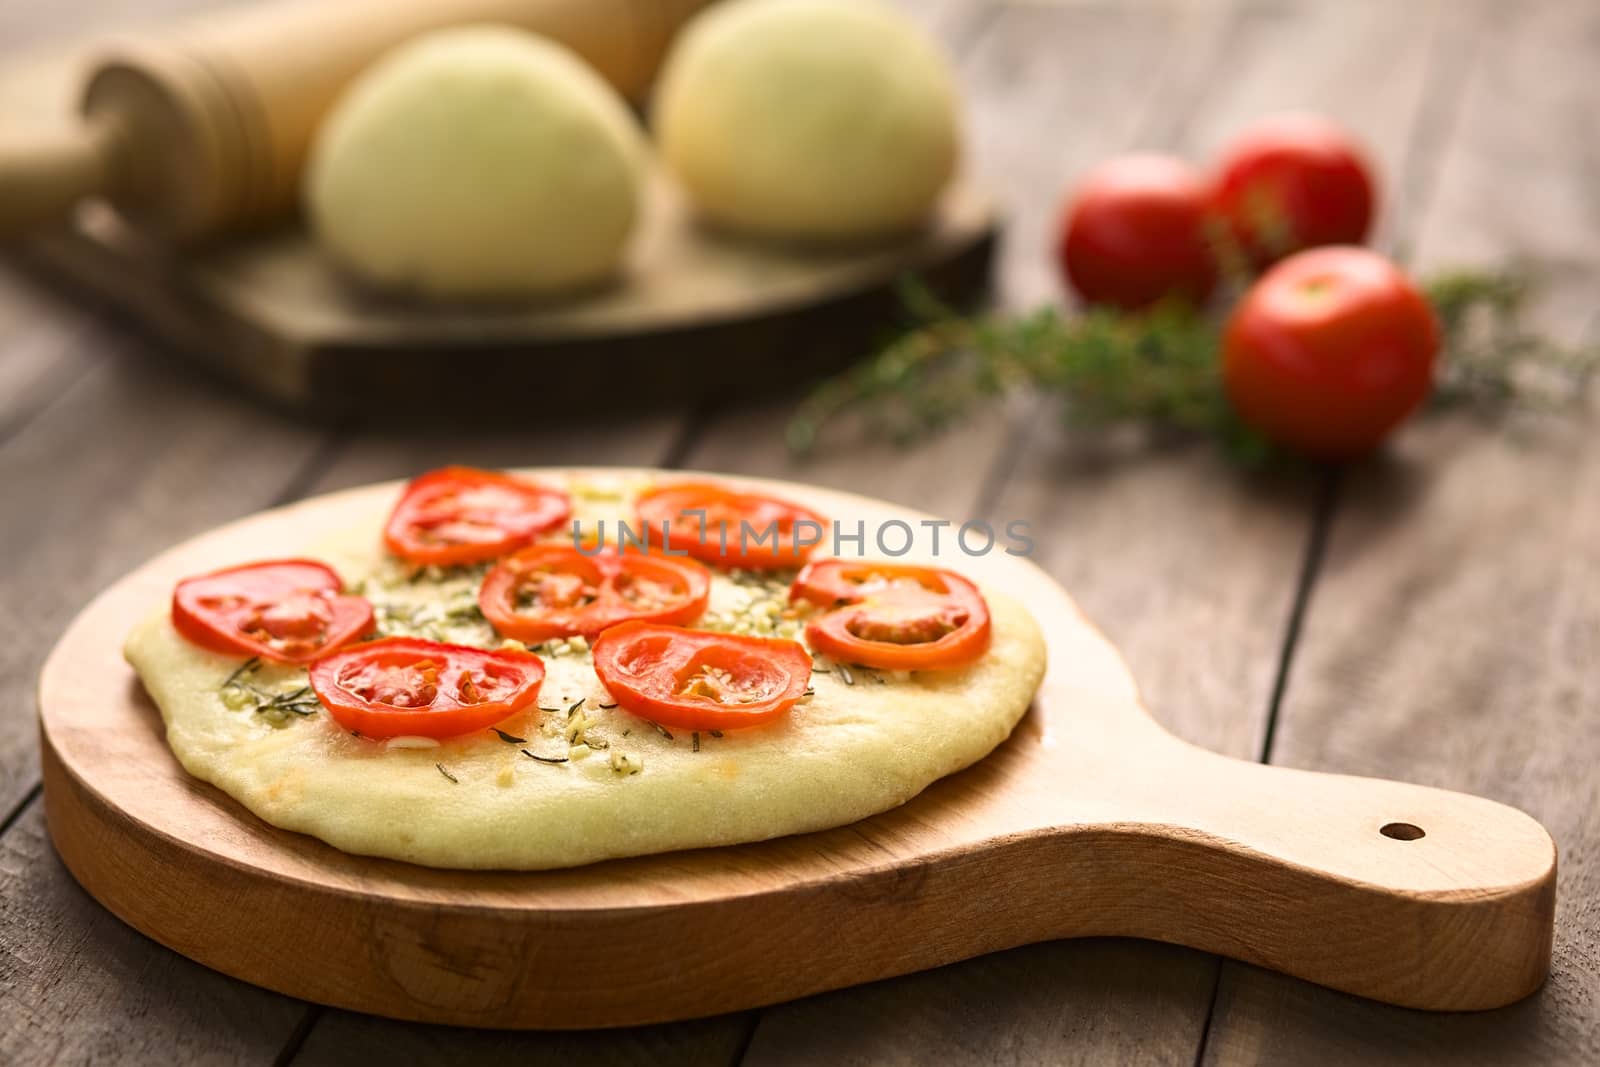 Freshly baked homemade yeast-dough flatbread topped with tomato slices, garlic and thyme leaves served on wooden board (Selective Focus, Focus on the front of the first tomato slices)  